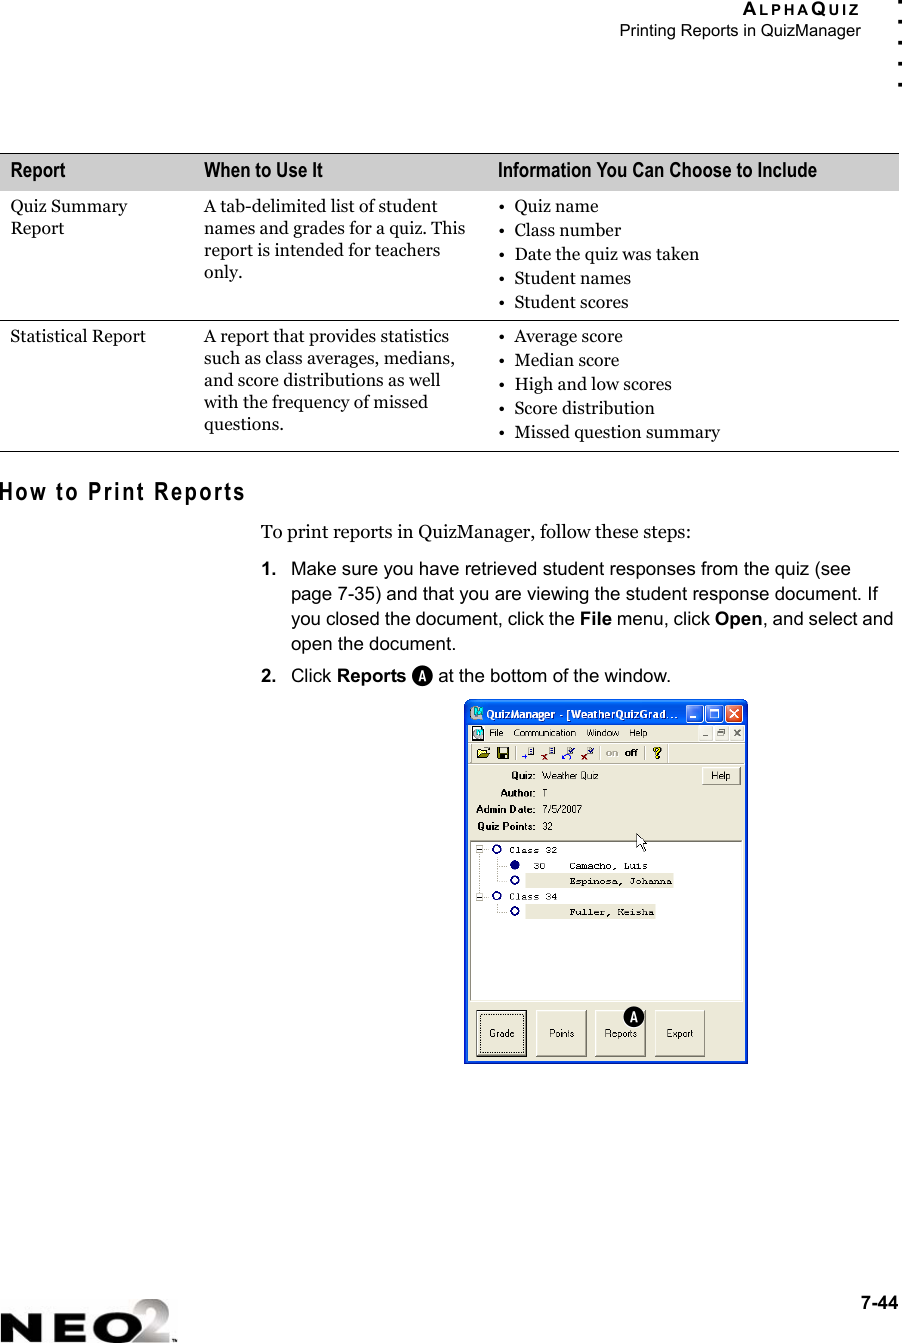 ALPHAQUIZPrinting Reports in QuizManager7-44. . . . .How to Print ReportsTo print reports in QuizManager, follow these steps:1. Make sure you have retrieved student responses from the quiz (see page 7-35) and that you are viewing the student response document. If you closed the document, click the File menu, click Open, and select and open the document. 2. Click Reports A at the bottom of the window.Quiz Summary ReportA tab-delimited list of student names and grades for a quiz. This report is intended for teachers only.•Quiz name• Class number• Date the quiz was taken• Student names• Student scoresStatistical Report A report that provides statistics such as class averages, medians, and score distributions as well with the frequency of missed questions.• Average score• Median score•High and low scores• Score distribution• Missed question summaryReport When to Use It Information You Can Choose to IncludeA